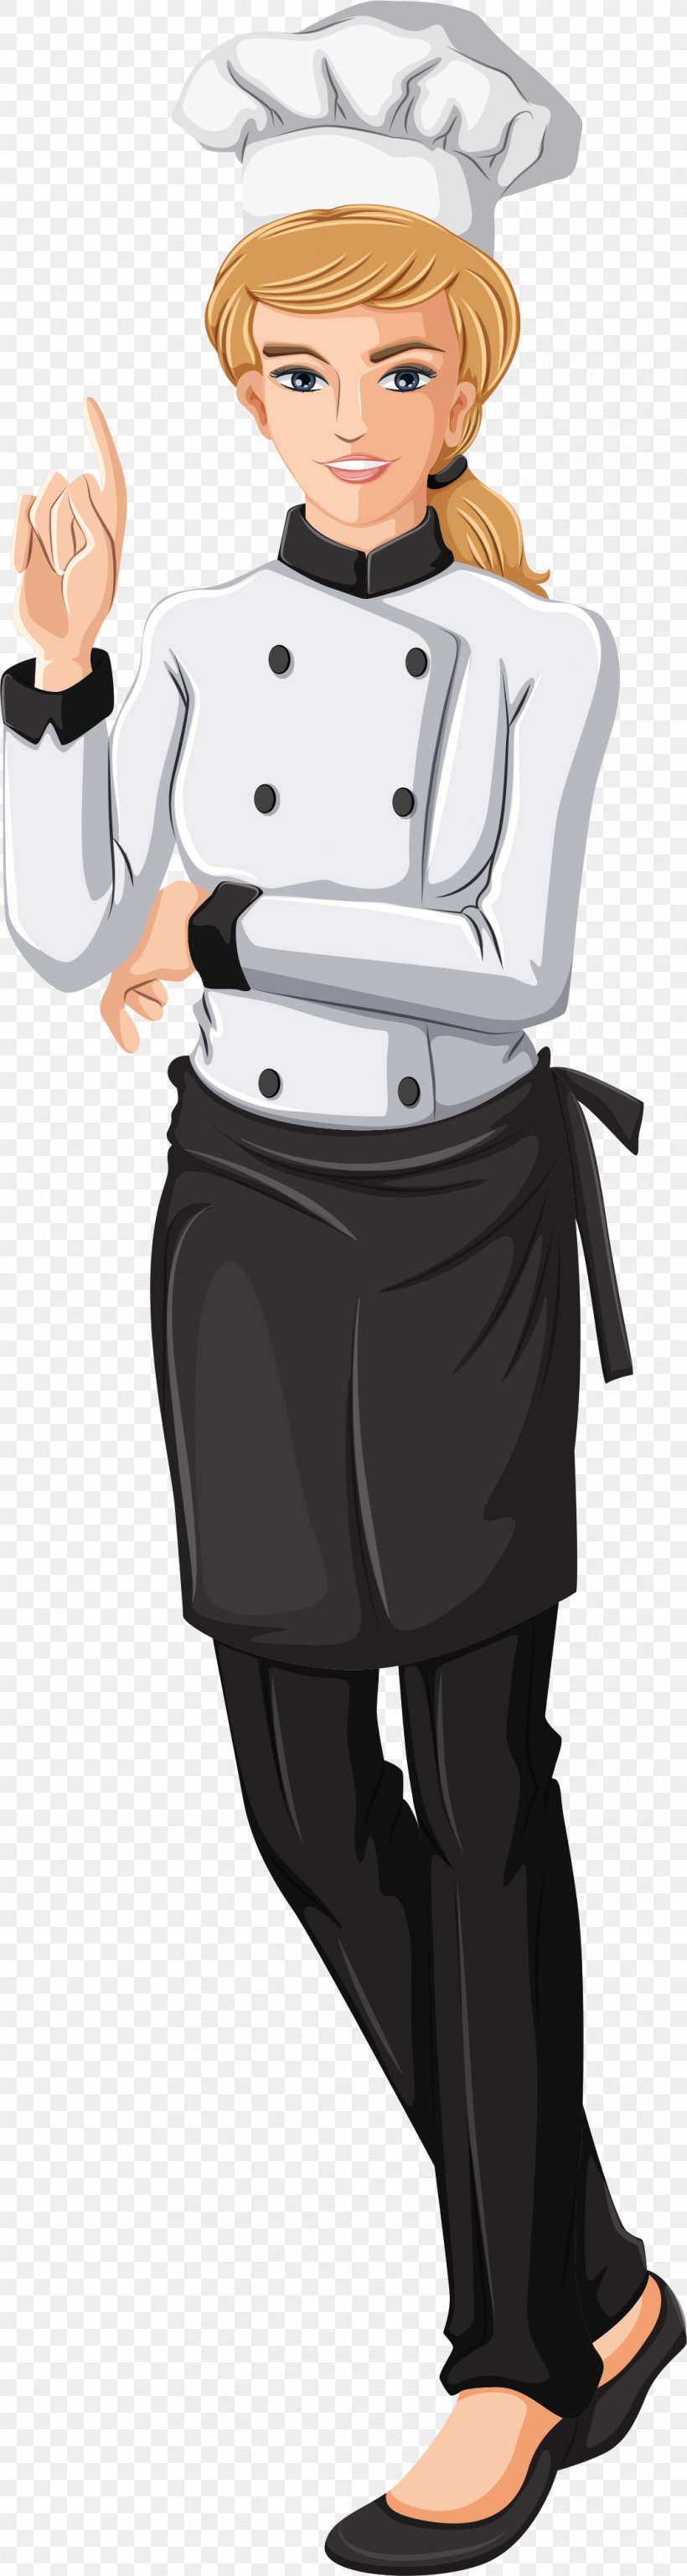 Chef Restaurant Cooking, PNG, 1063x3987px, Chef, Baker, Cartoon, Cook, Cooking Download Free